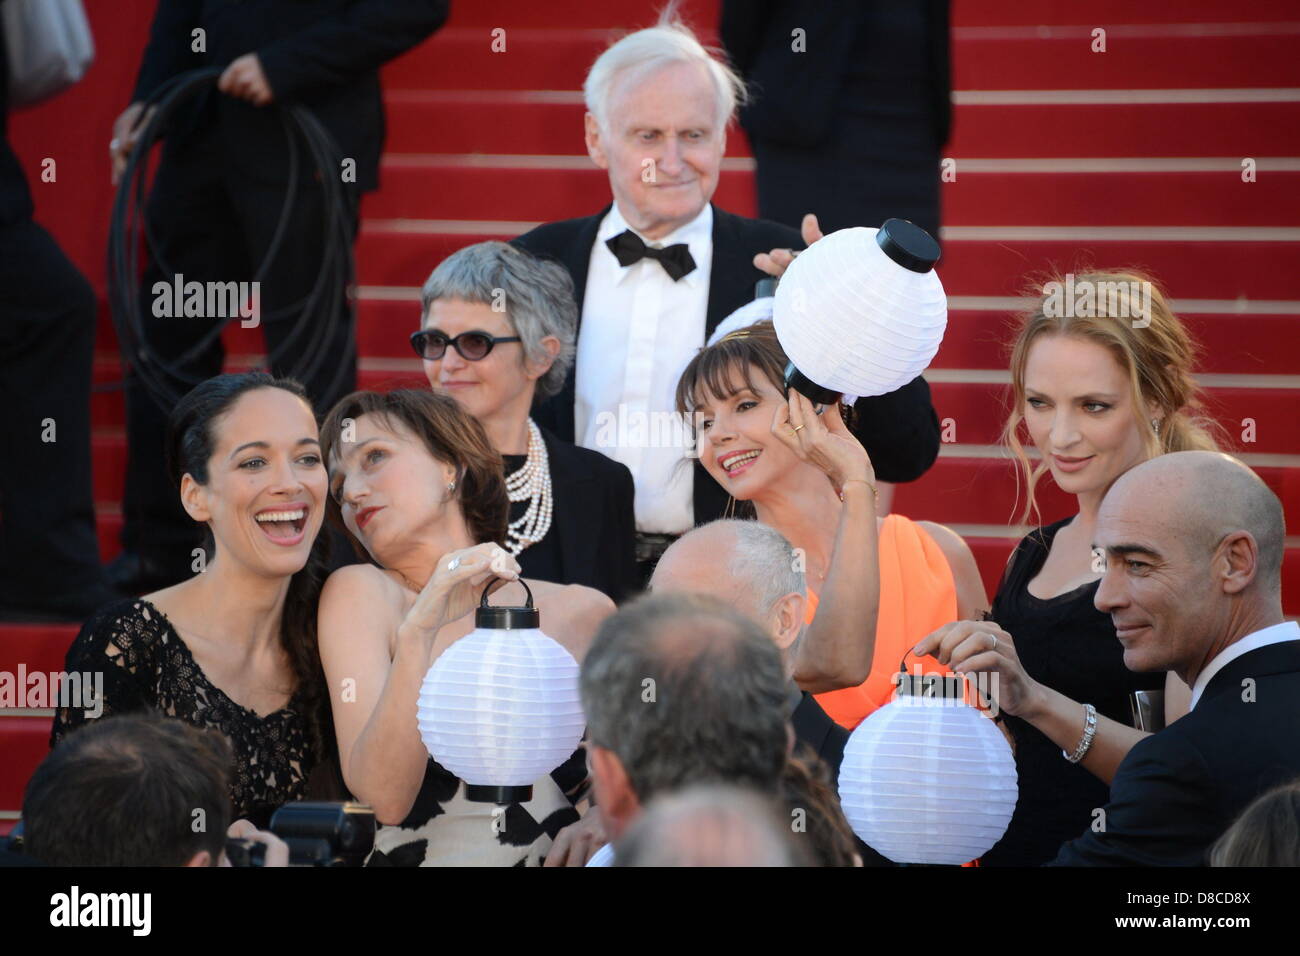 May 24, 2013 - Cannes, France - CANNES, FRANCE - MAY 24: (2nd L-R) Kristin Scott Thomas, Victoria Abril, Uma Thurman and Jean Marc Barr attend the Premiere of 'The Immigrant' at The 66th Annual Cannes Film Festival at Palais des Festivals on May 24, 2013 in Cannes, France. (Credit Image: © Frederick Injimbert/ZUMAPRESS.com) Stock Photo